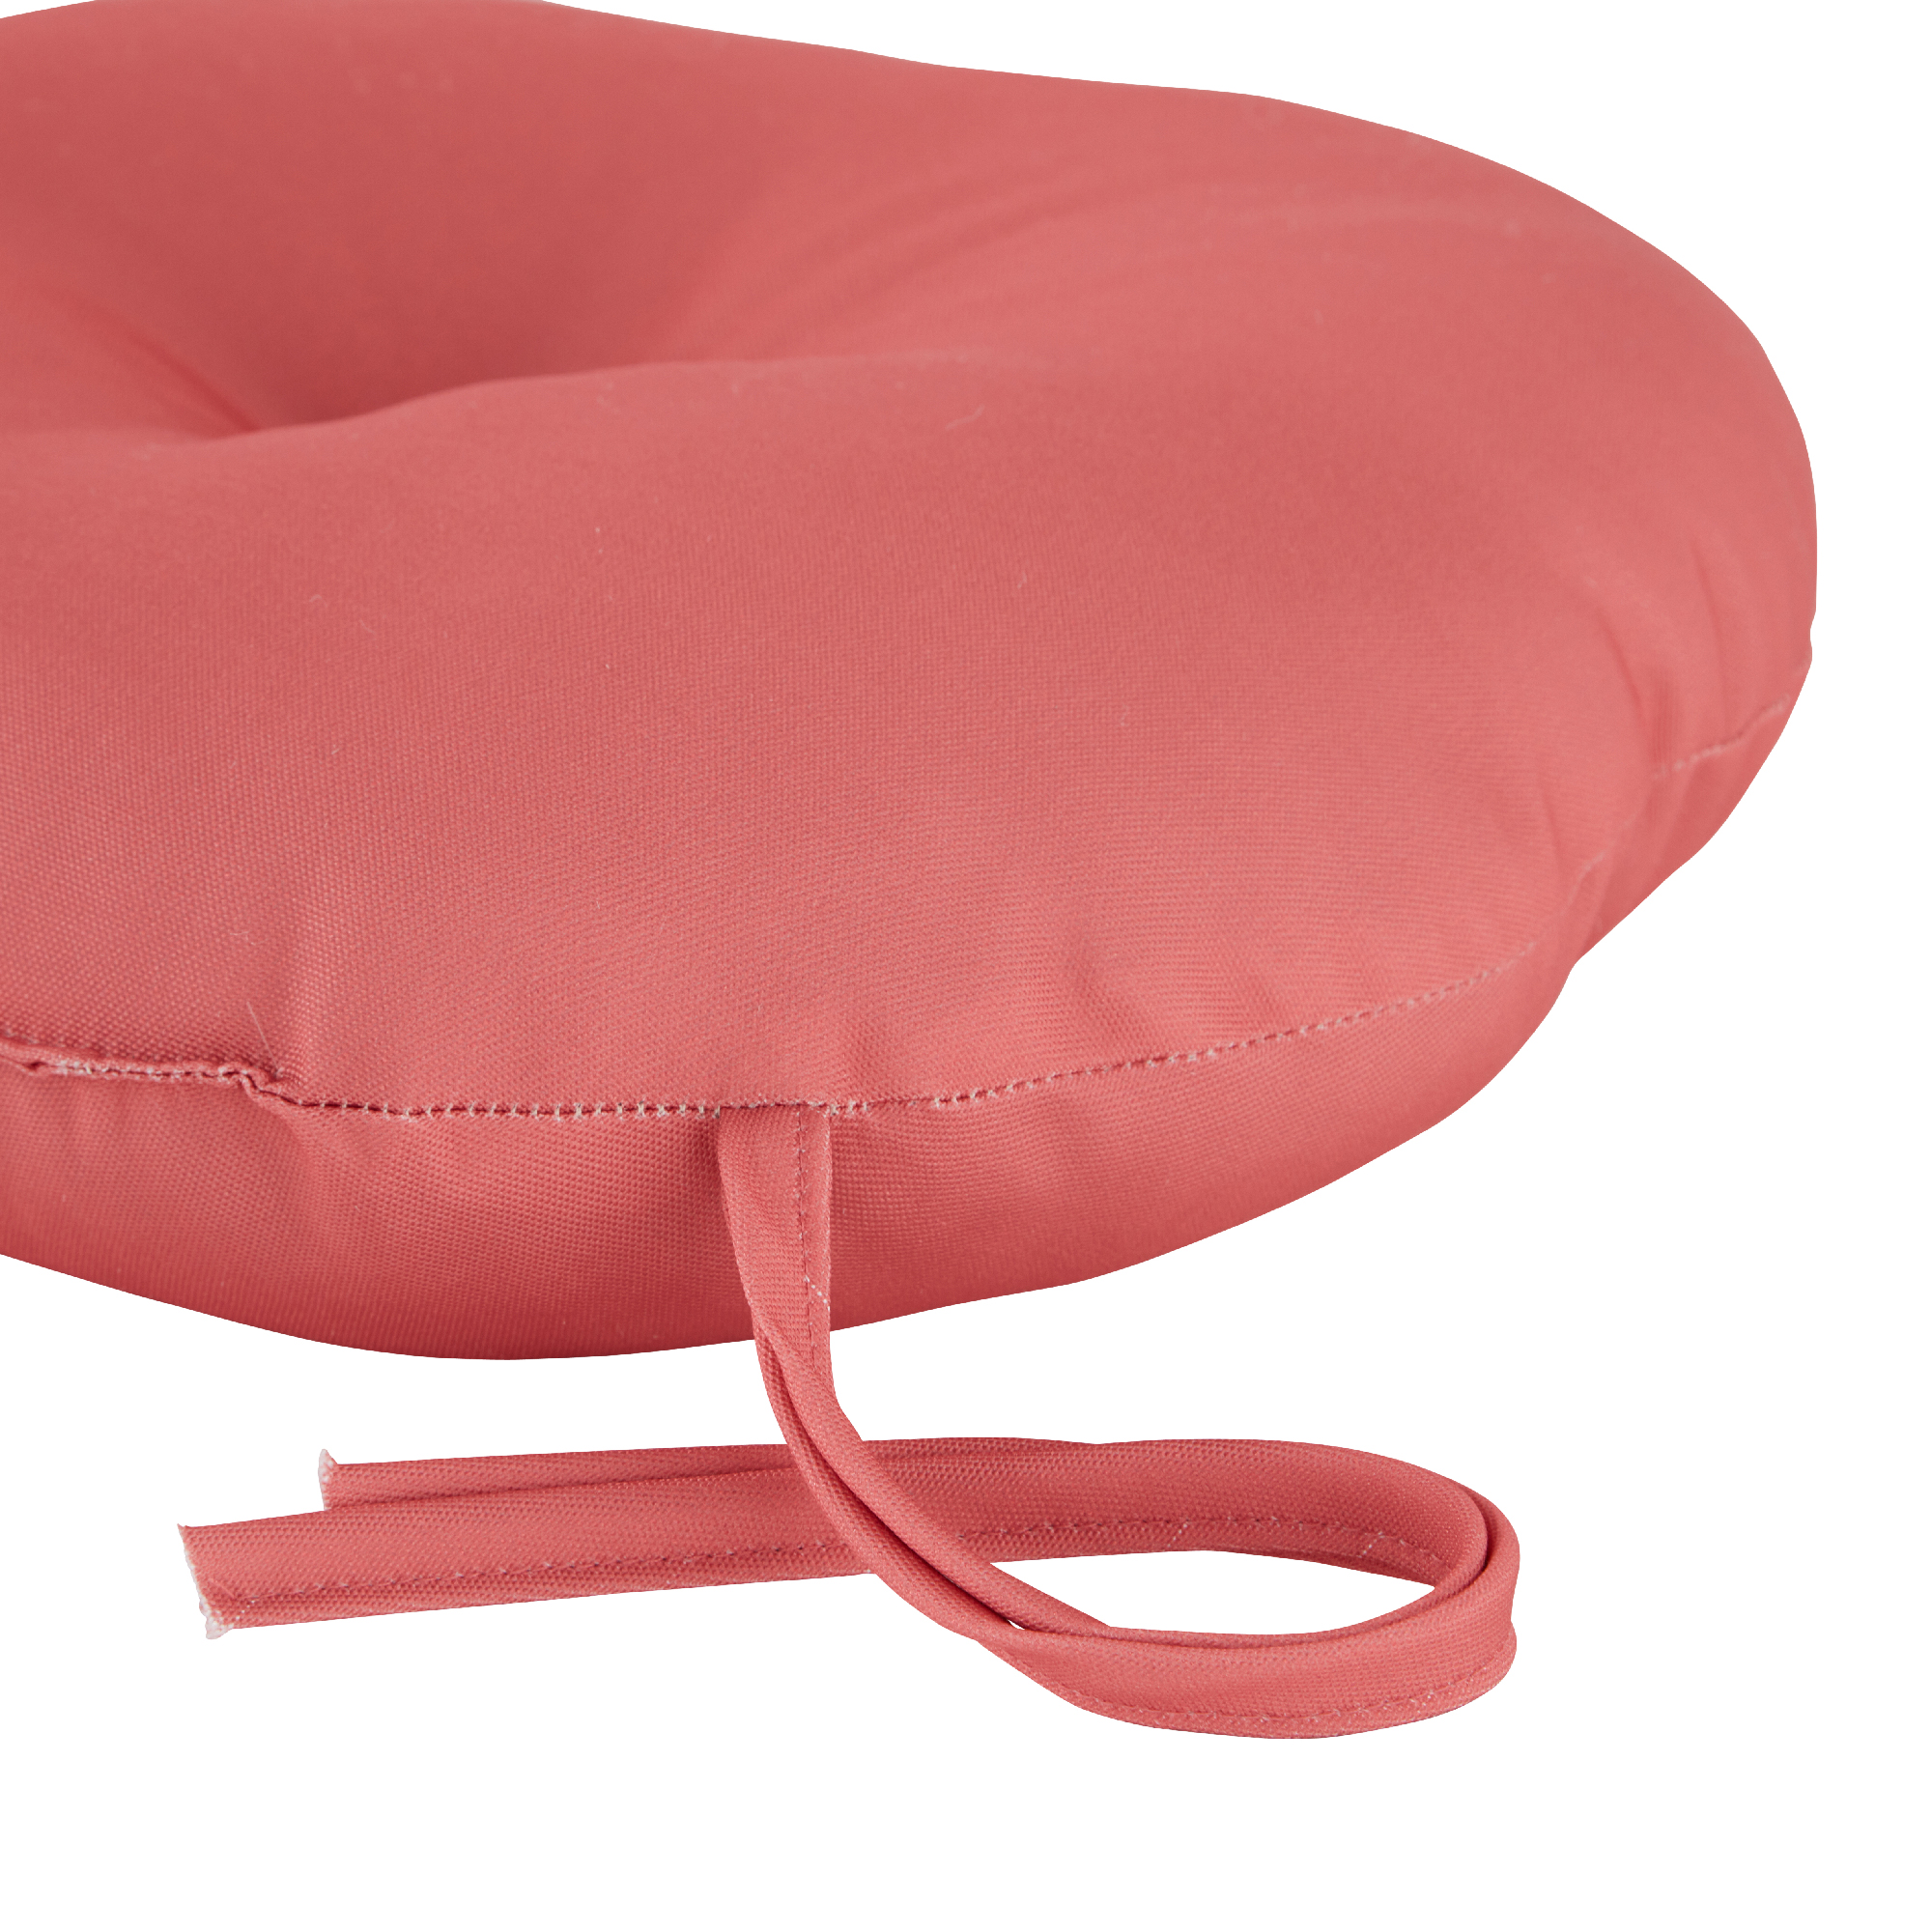 Greendale Home Fashions Coral 15 in. Round Outdoor Reversible Bistro Seat Cushion (Set of 2) - image 4 of 6